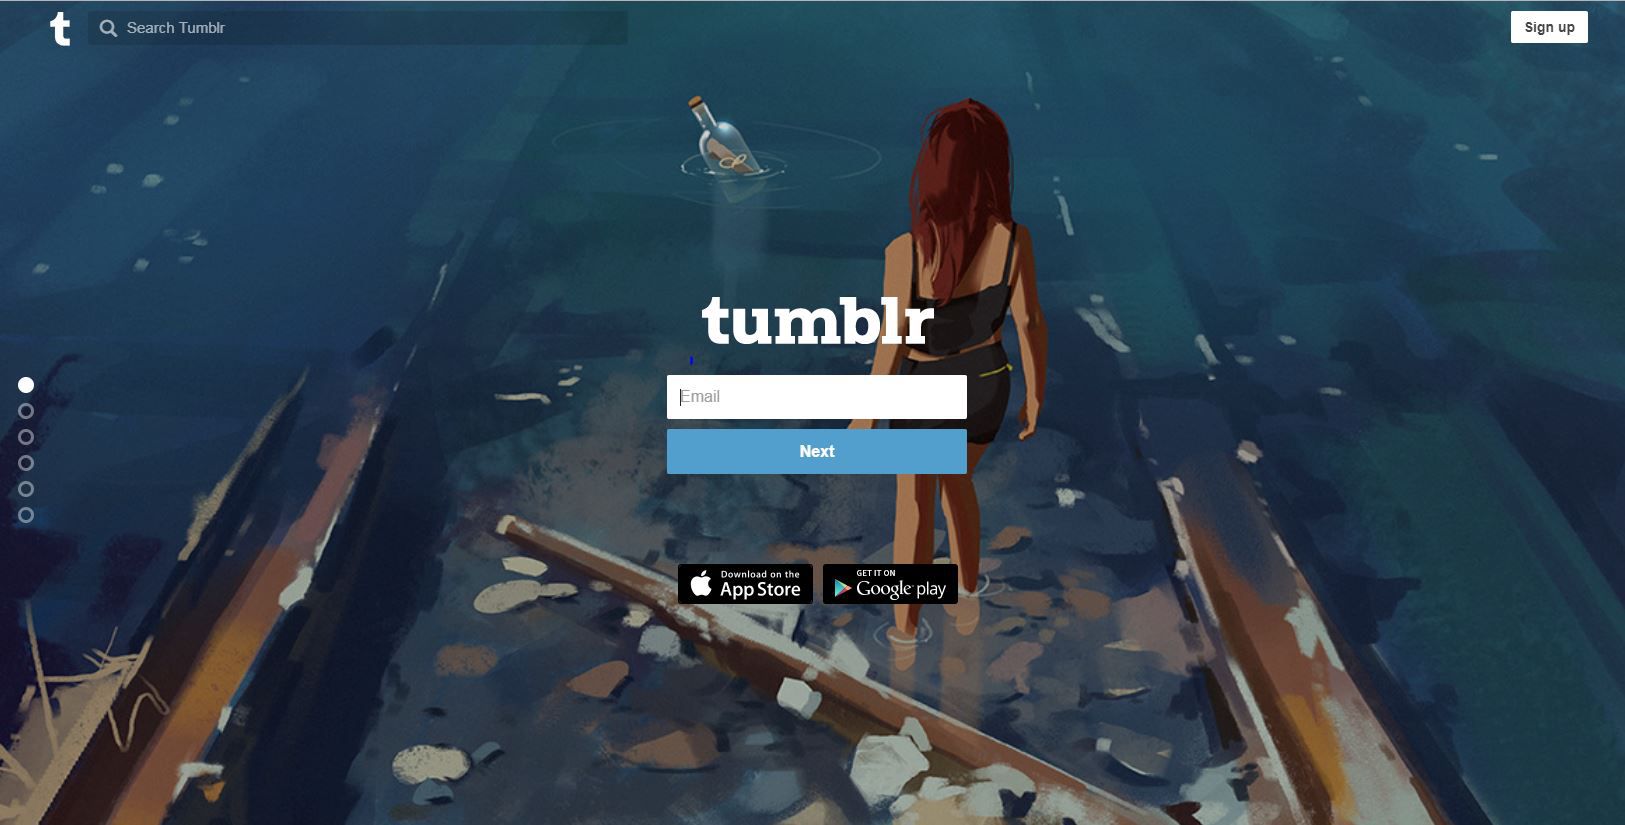 Xxx No Ban Video - Tumblr bans pornography and most nudity, sending users searching ...